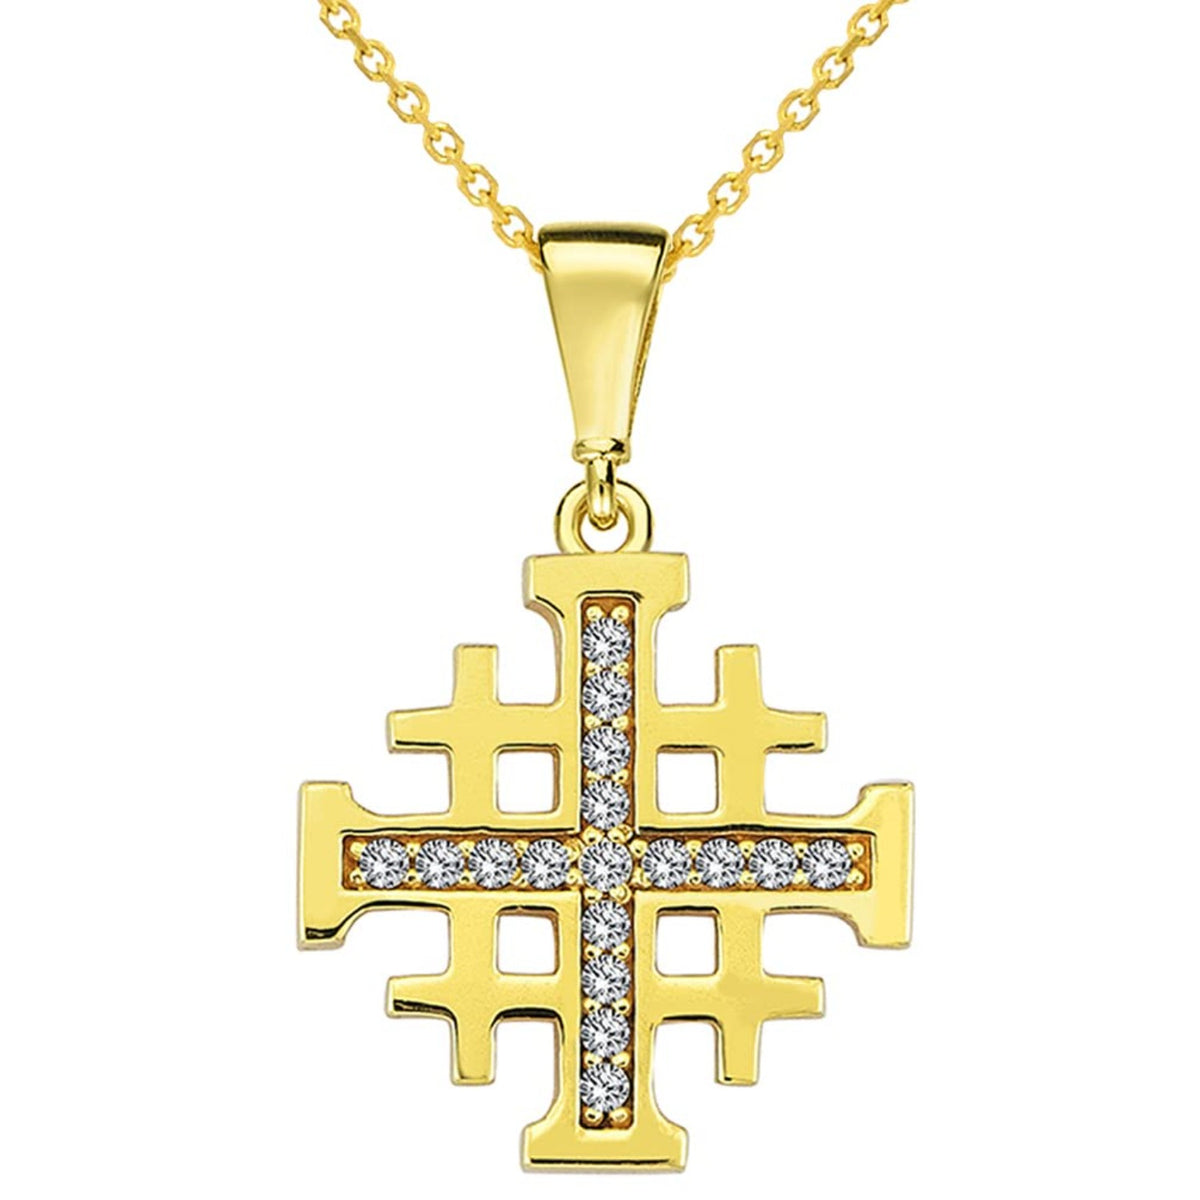 Solid 14k Yellow Gold CZ Religious Crusaders Jerusalem Cross Pendant Necklace